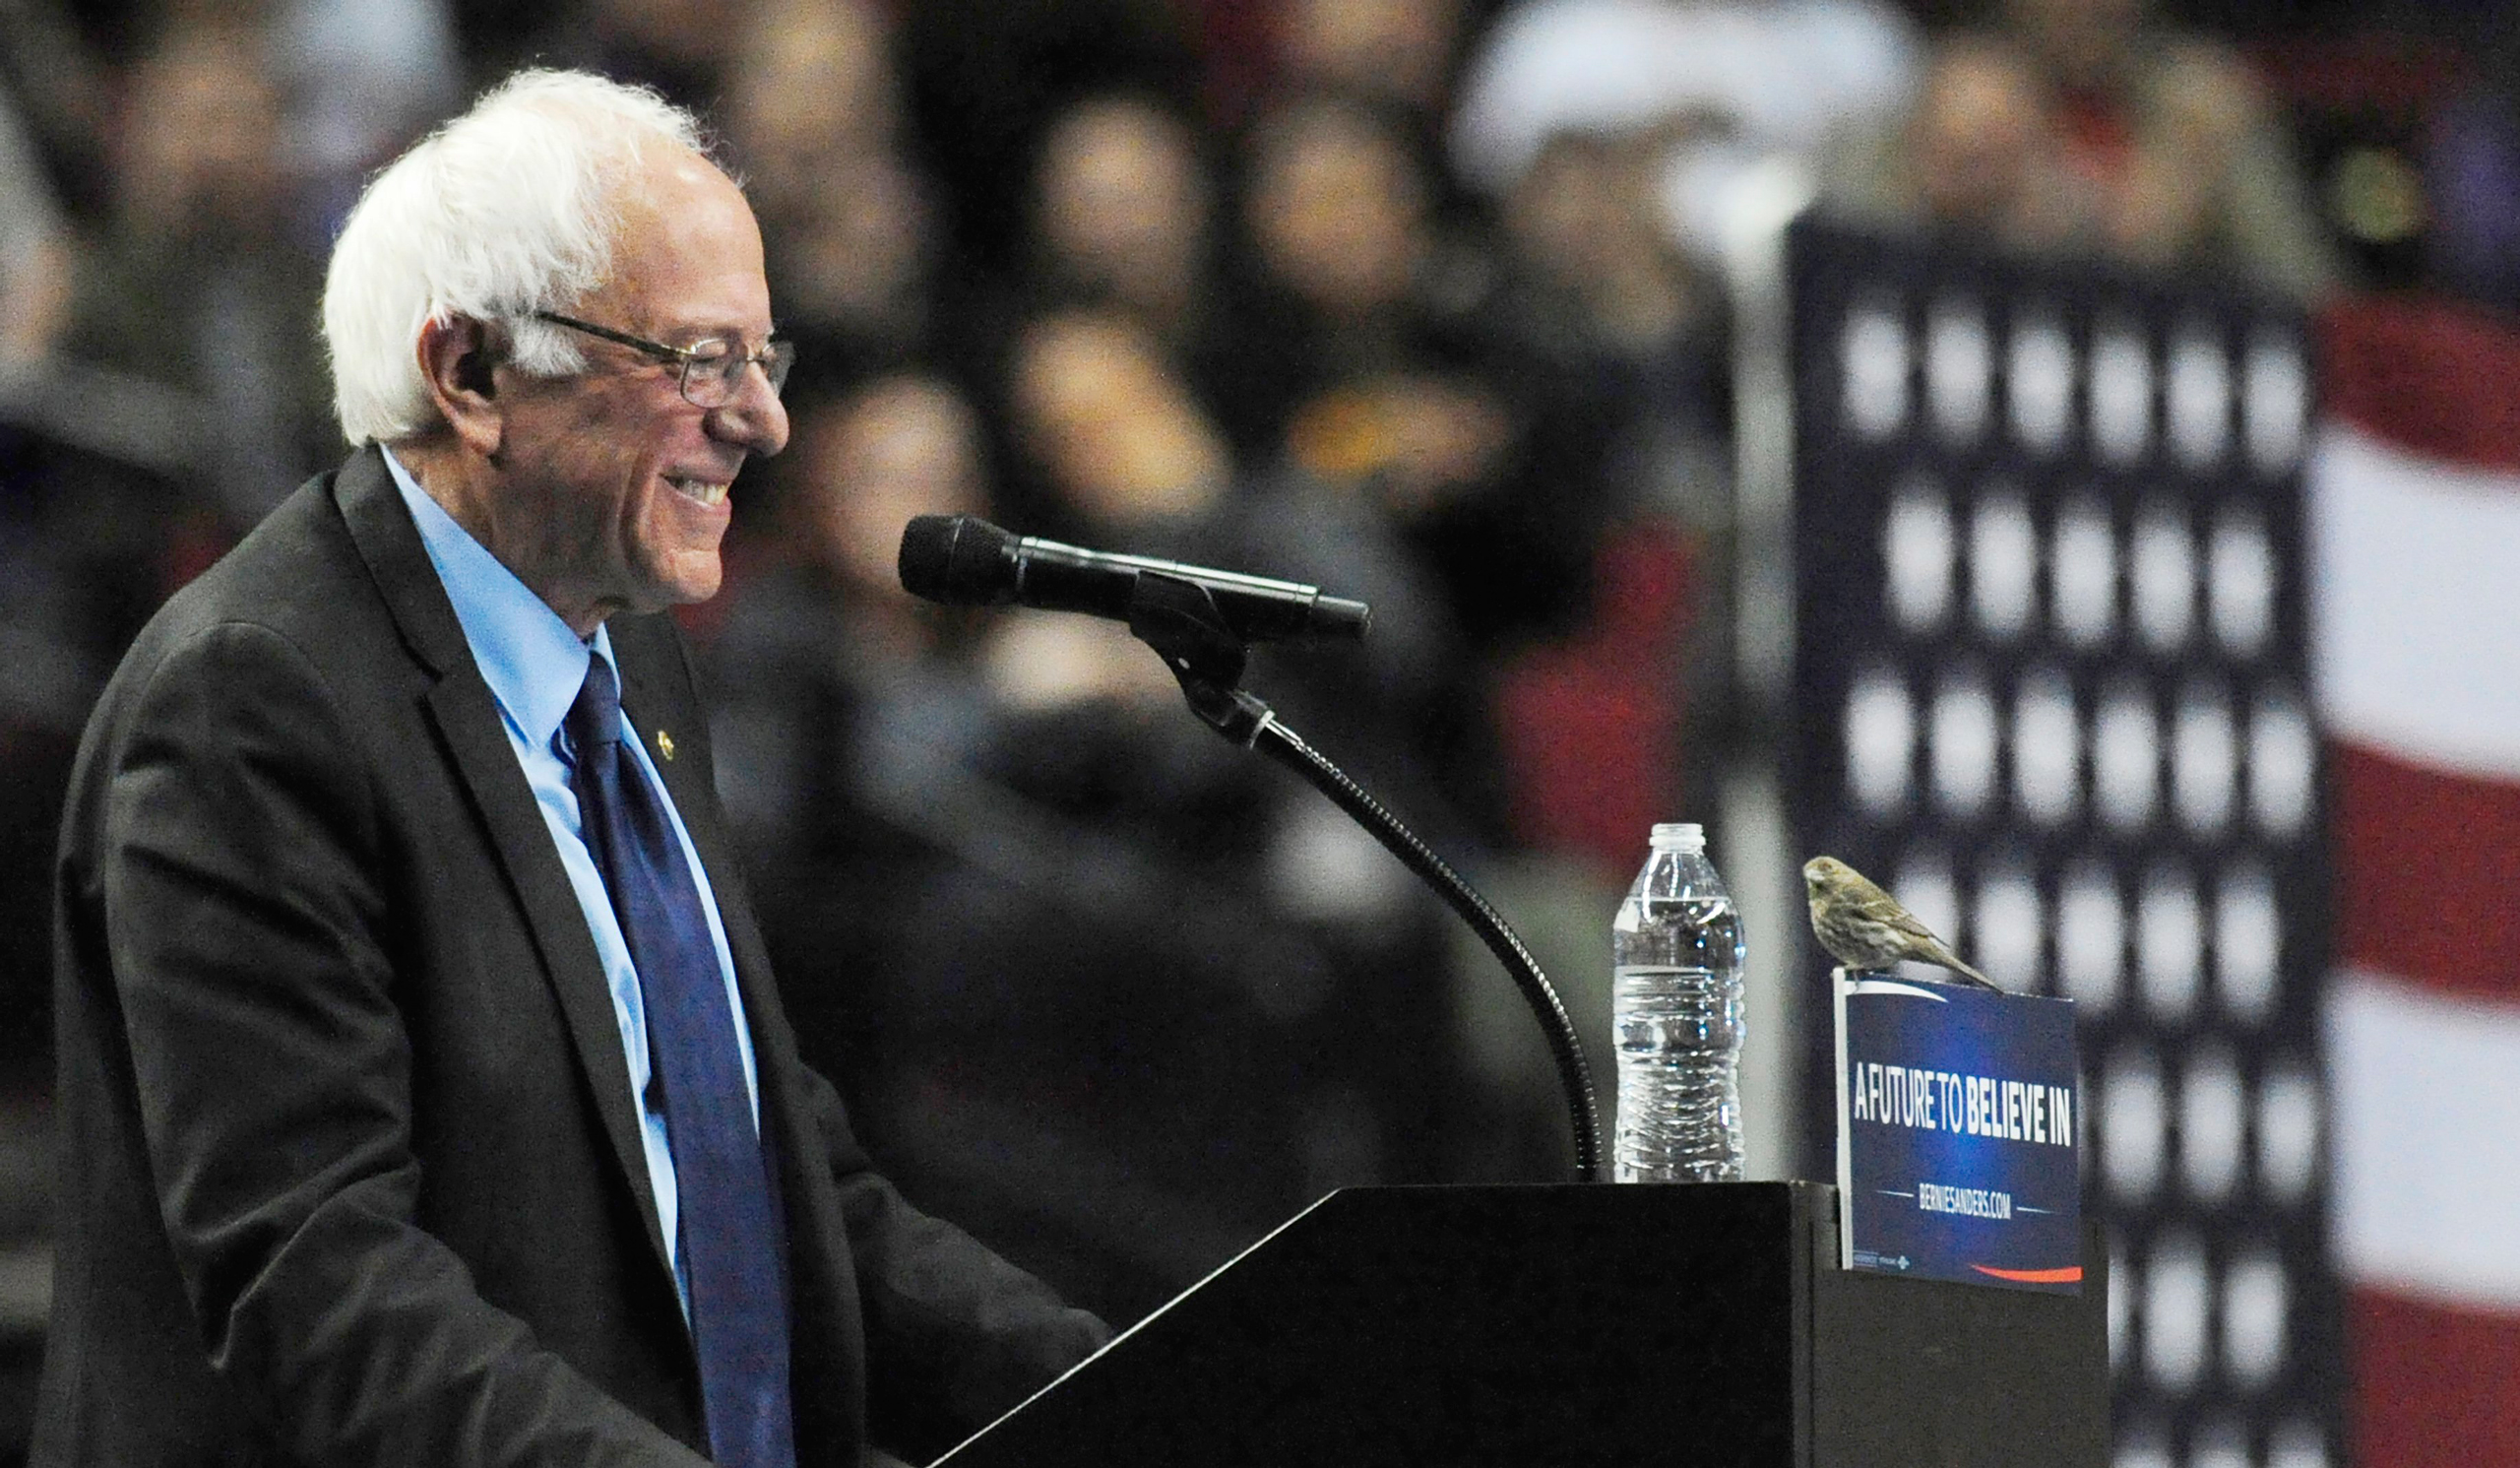 Democratic presidential candidate Sen. Bernie Sanders, I-Vt., smiles as a bird lands on his podium as he speaks during a rally at the Moda Center in Portland, Ore., Friday, March 25, 2016. (AP Photo/Steve Dykes)